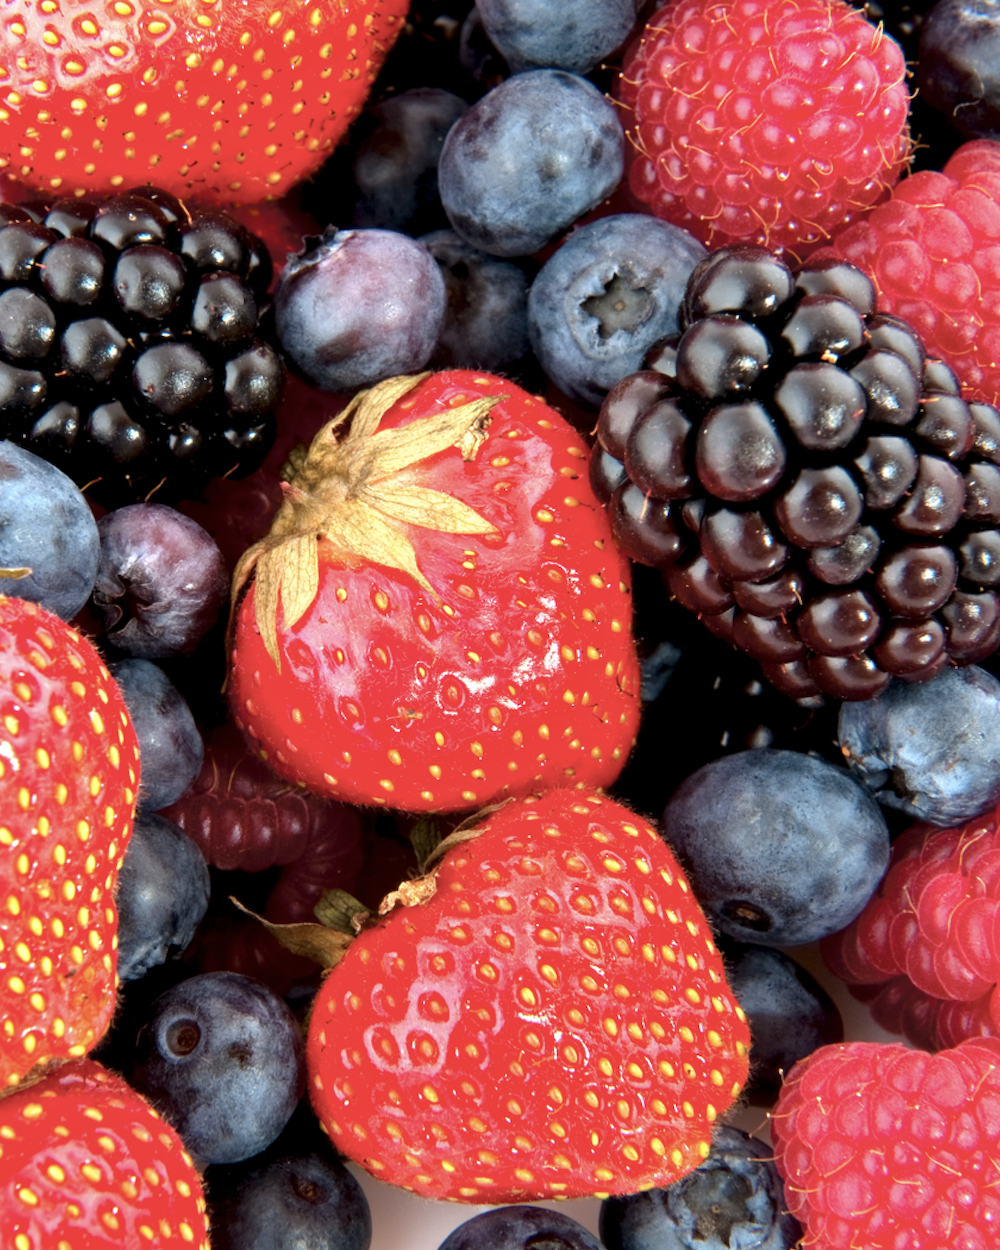 Berry Good News for Fruit Lovers